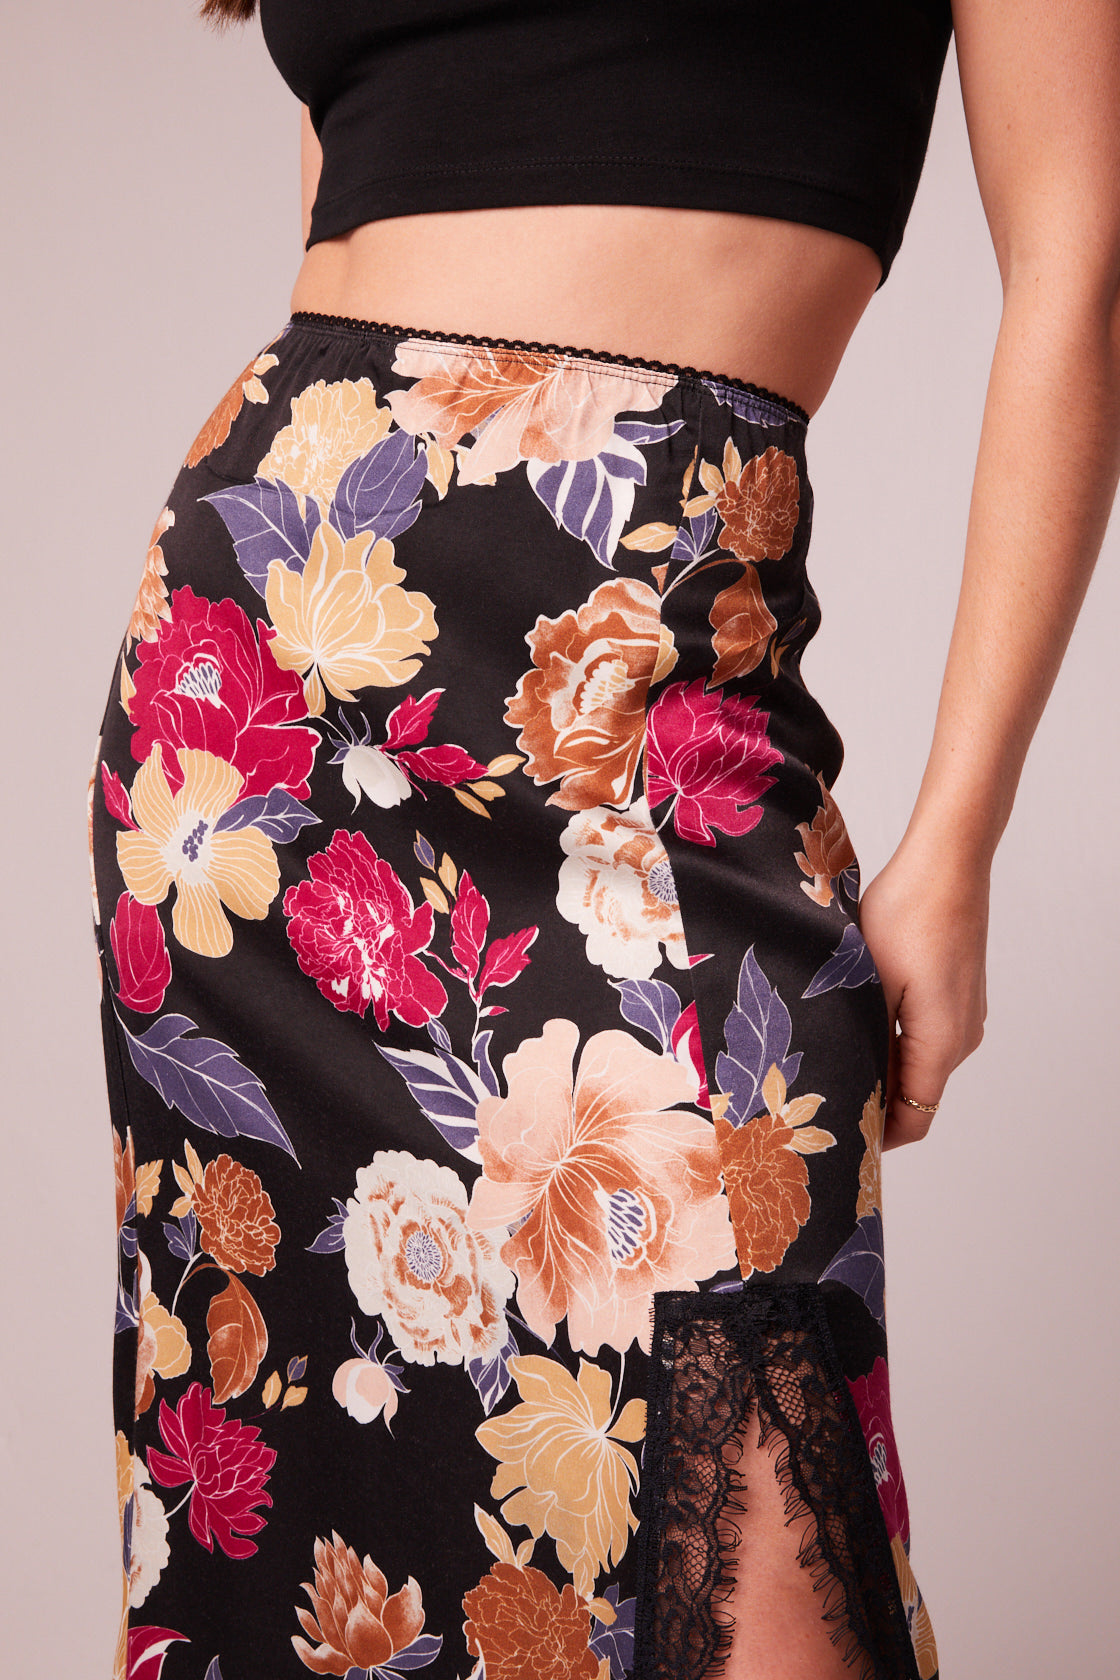 Lilou Black - Skirt band Floral Slip Midi free Lace of the